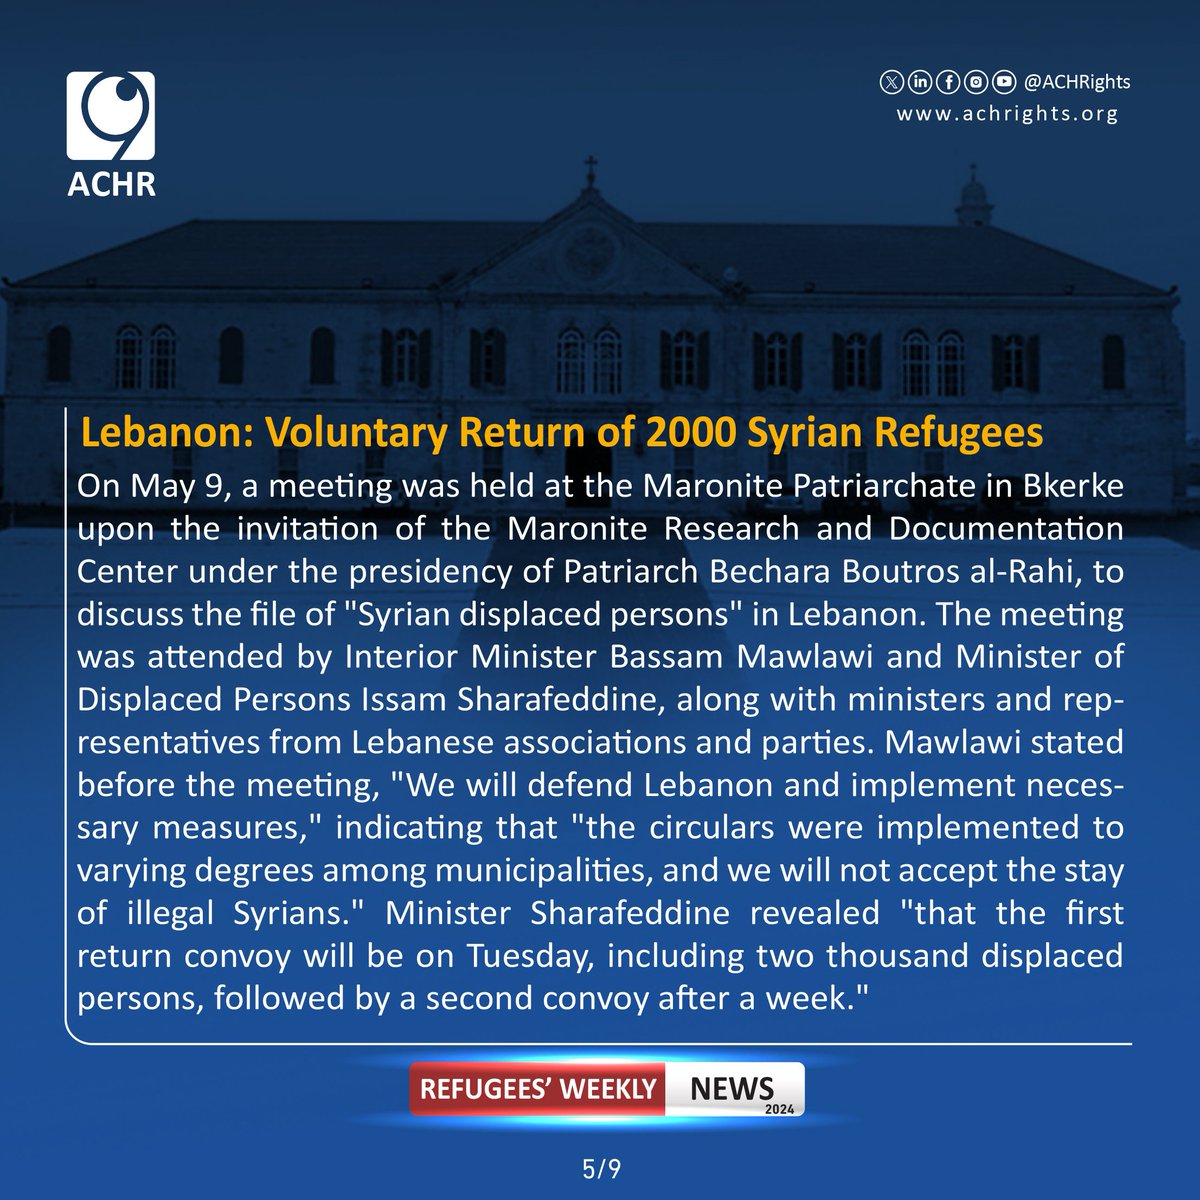 Lebanon: Voluntary Return of 2000 Syrian Refugees.
#Together_for_Human_Rights #weeklynews #violations #humanrights #syrianrefugees #lebanon #syria #RefugeesRight